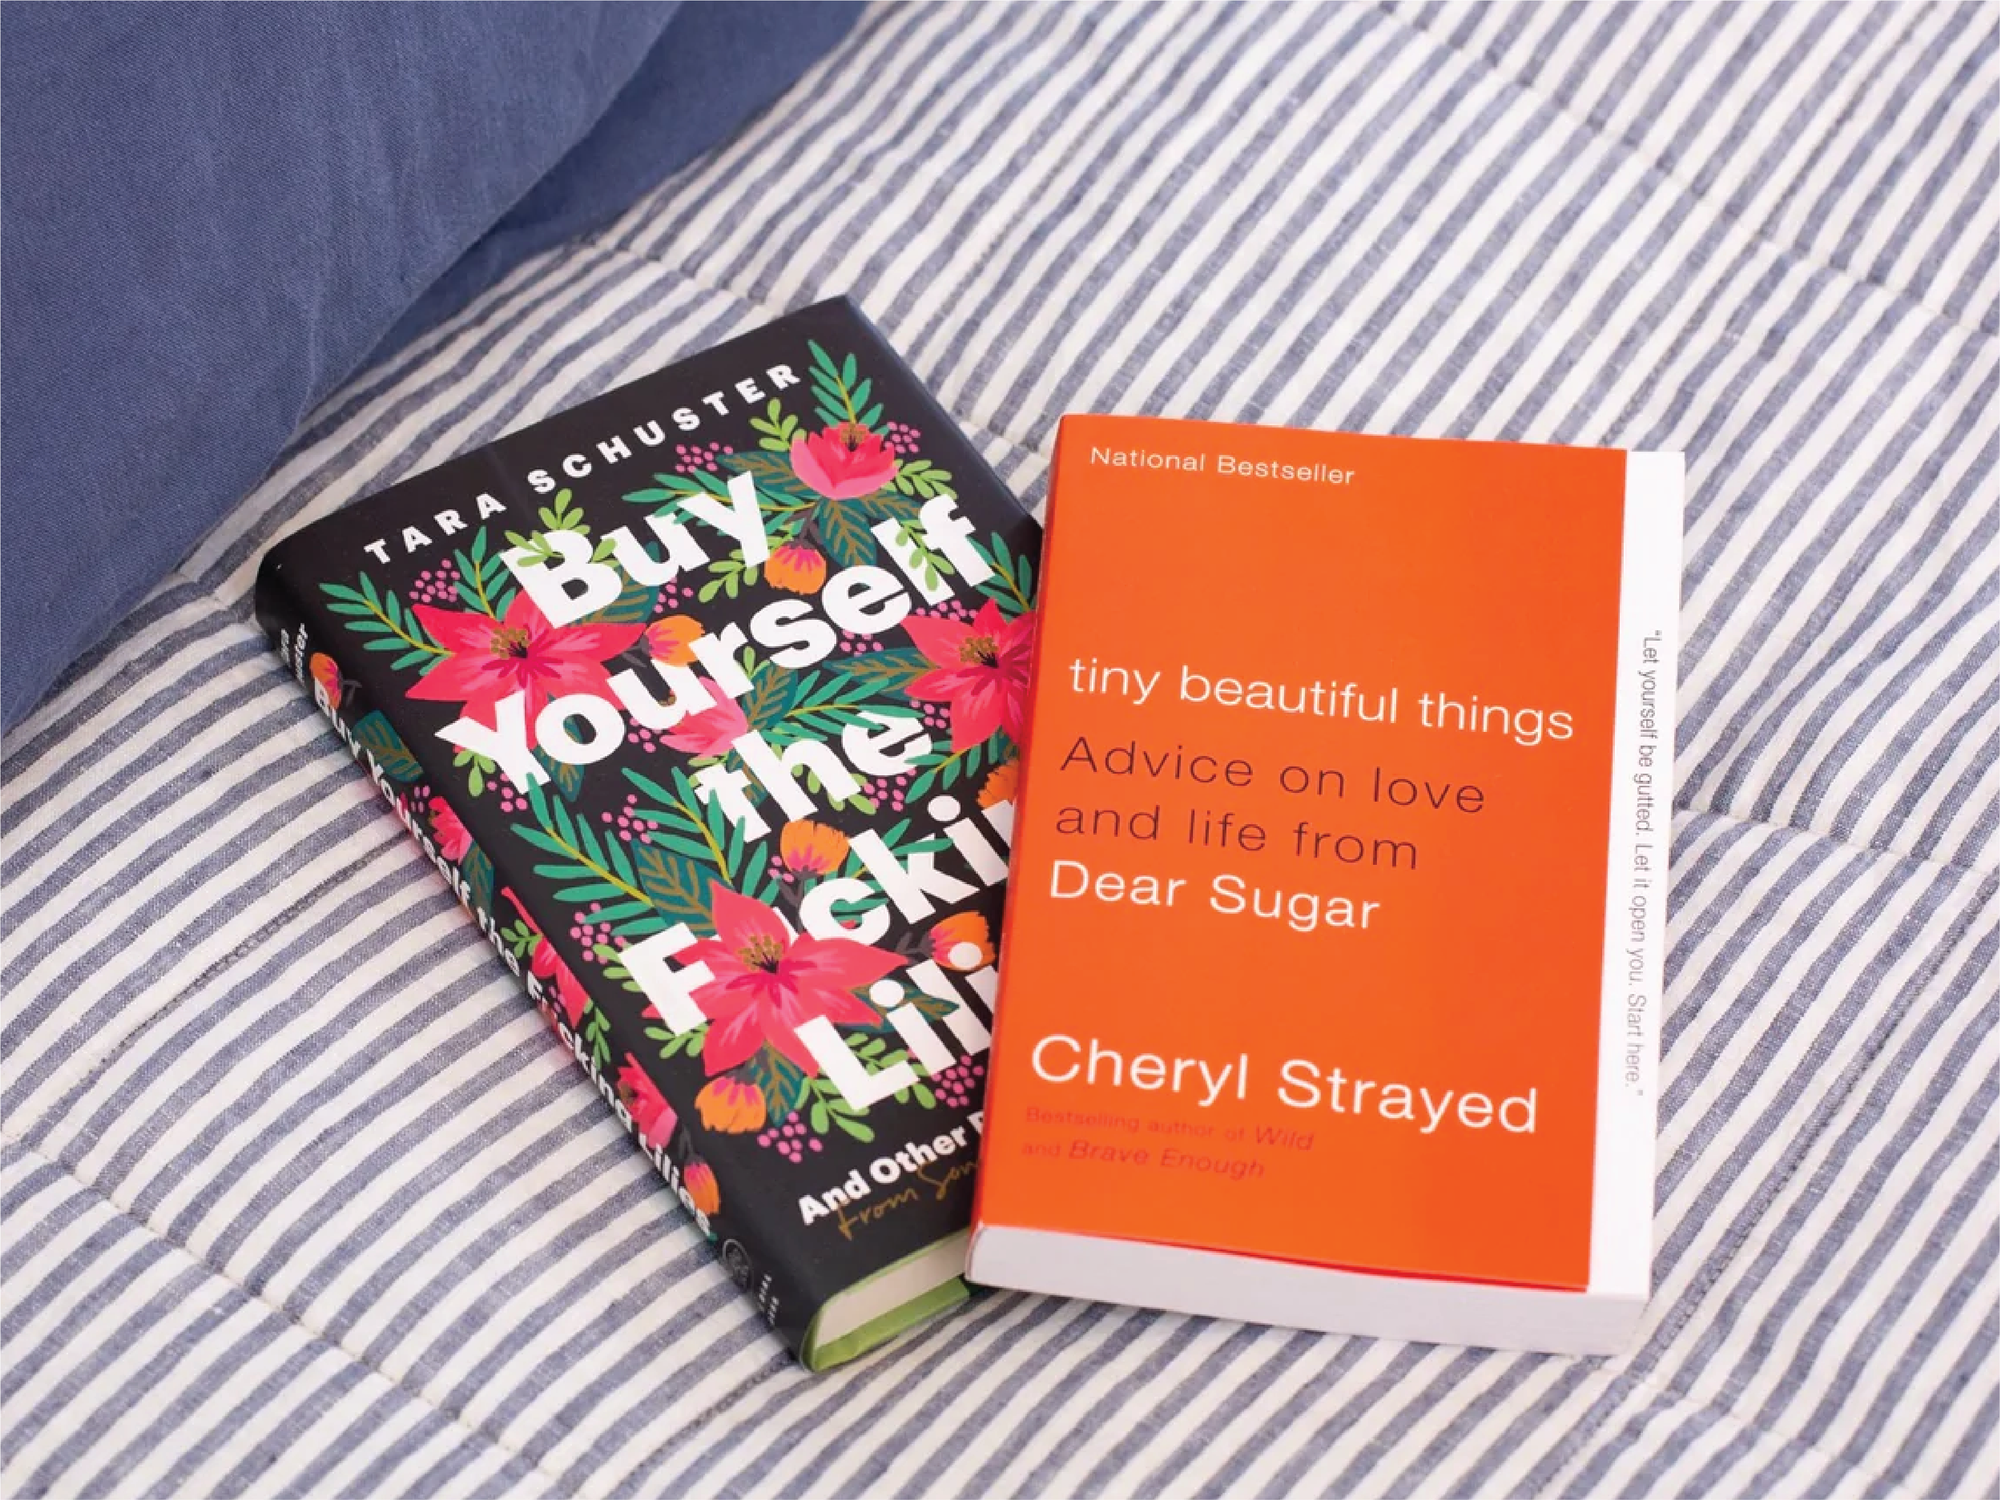 Read This: tiny beautiful things and Buy Yourself the F*cking Lilies